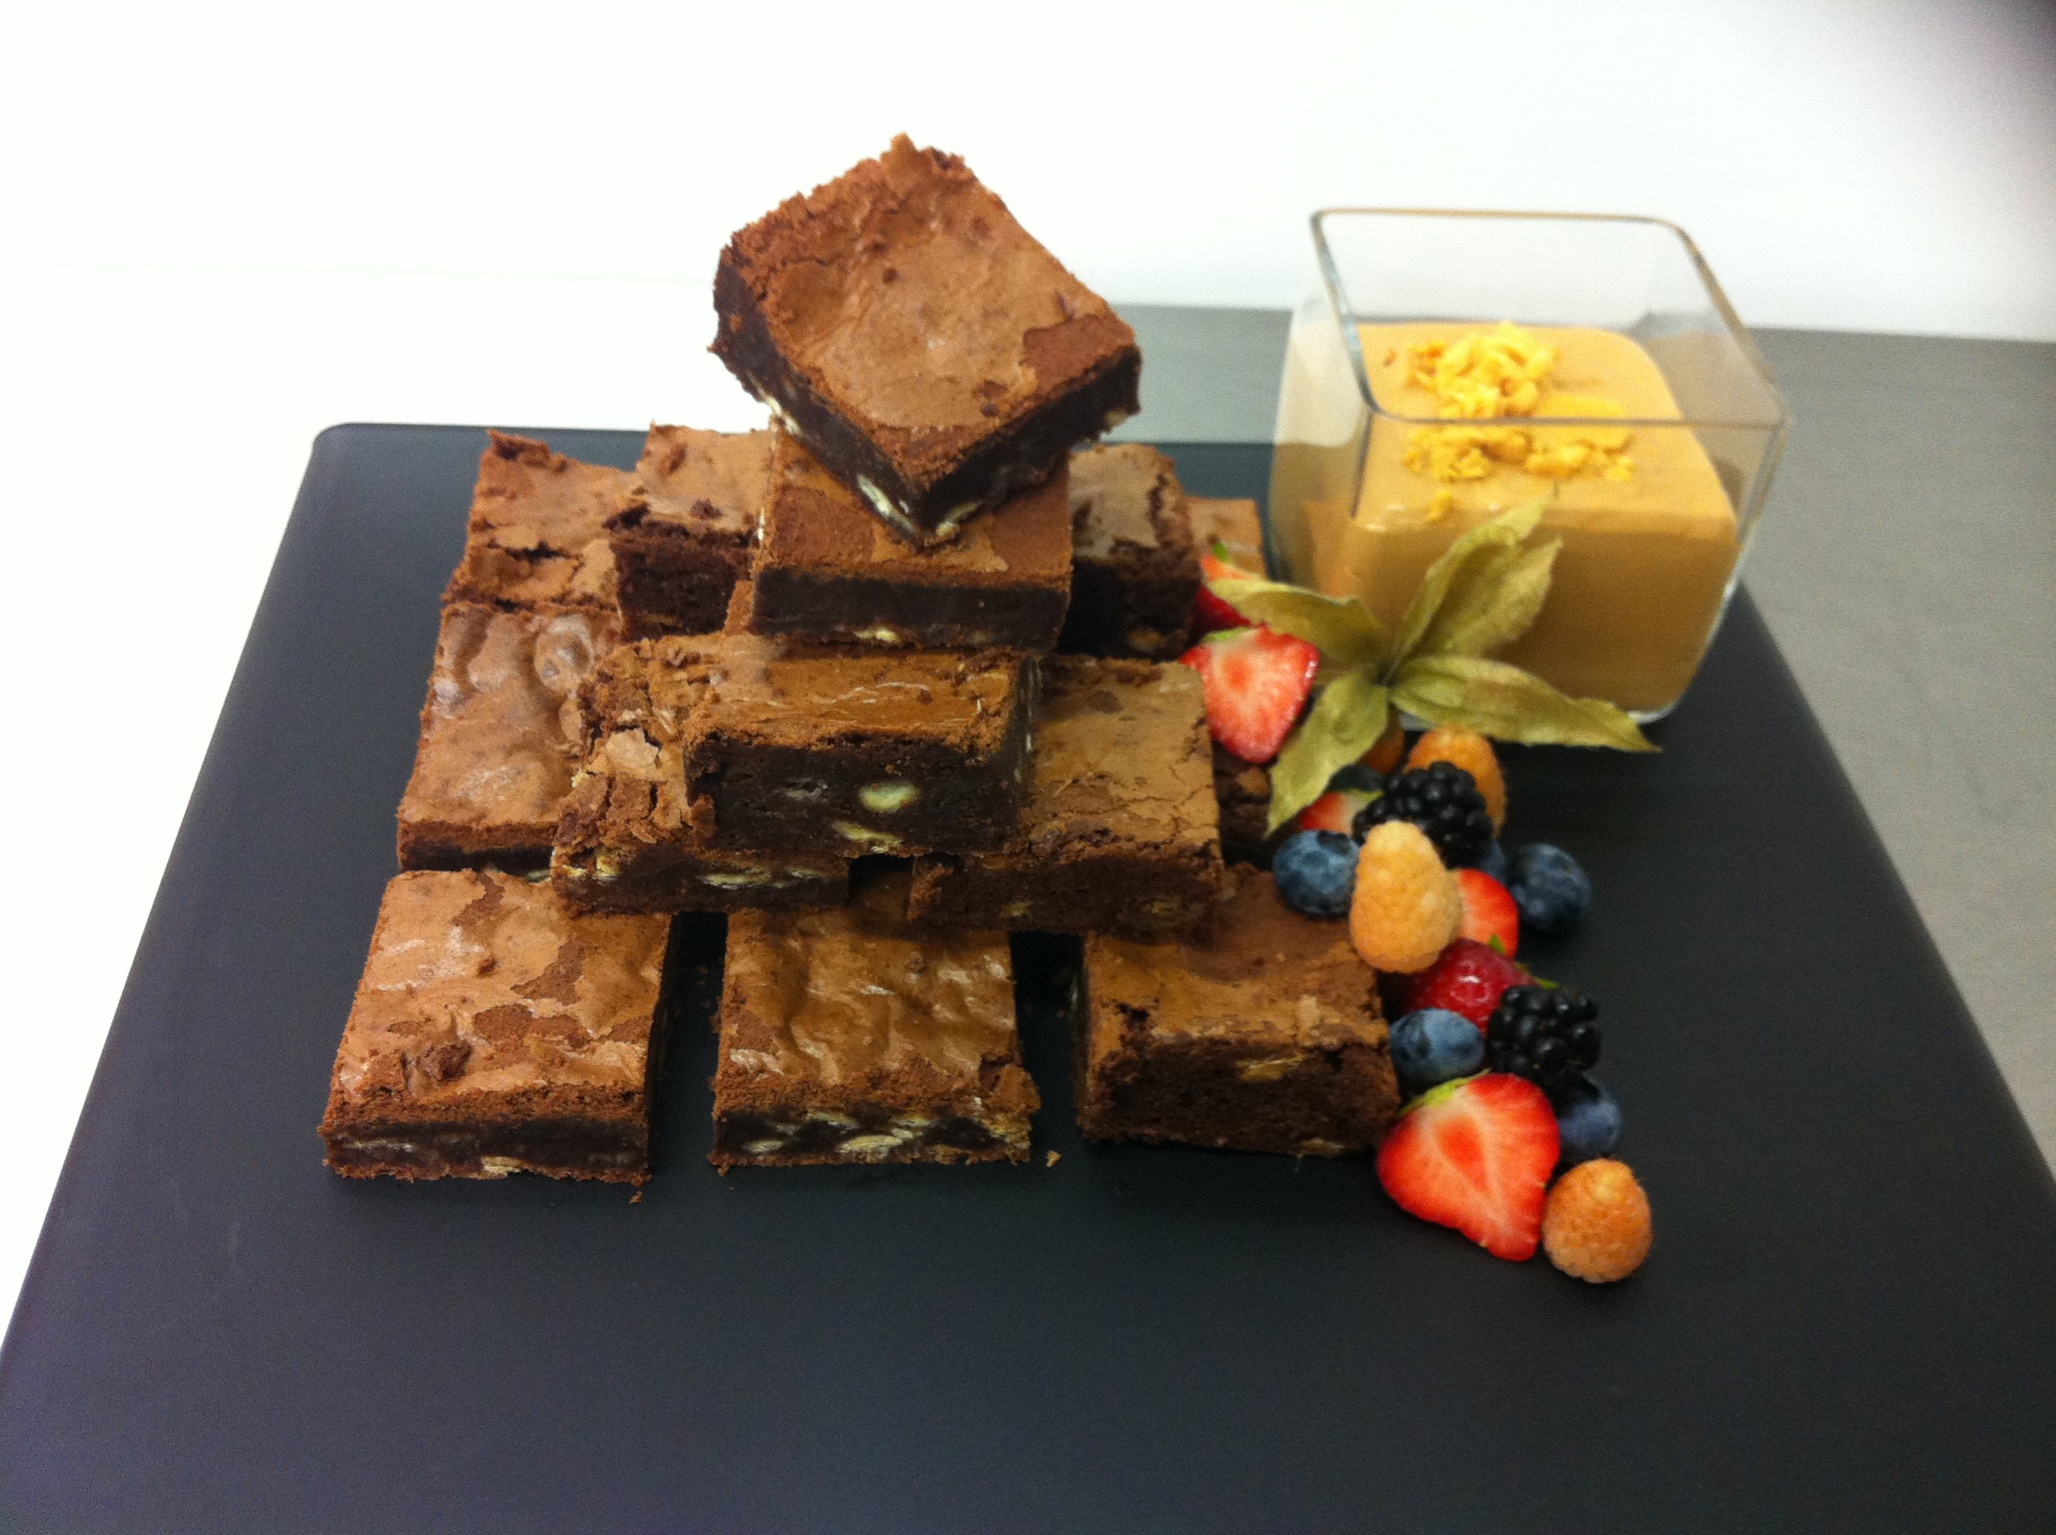 Chocolate brownies with a toffee honeycomb sauce